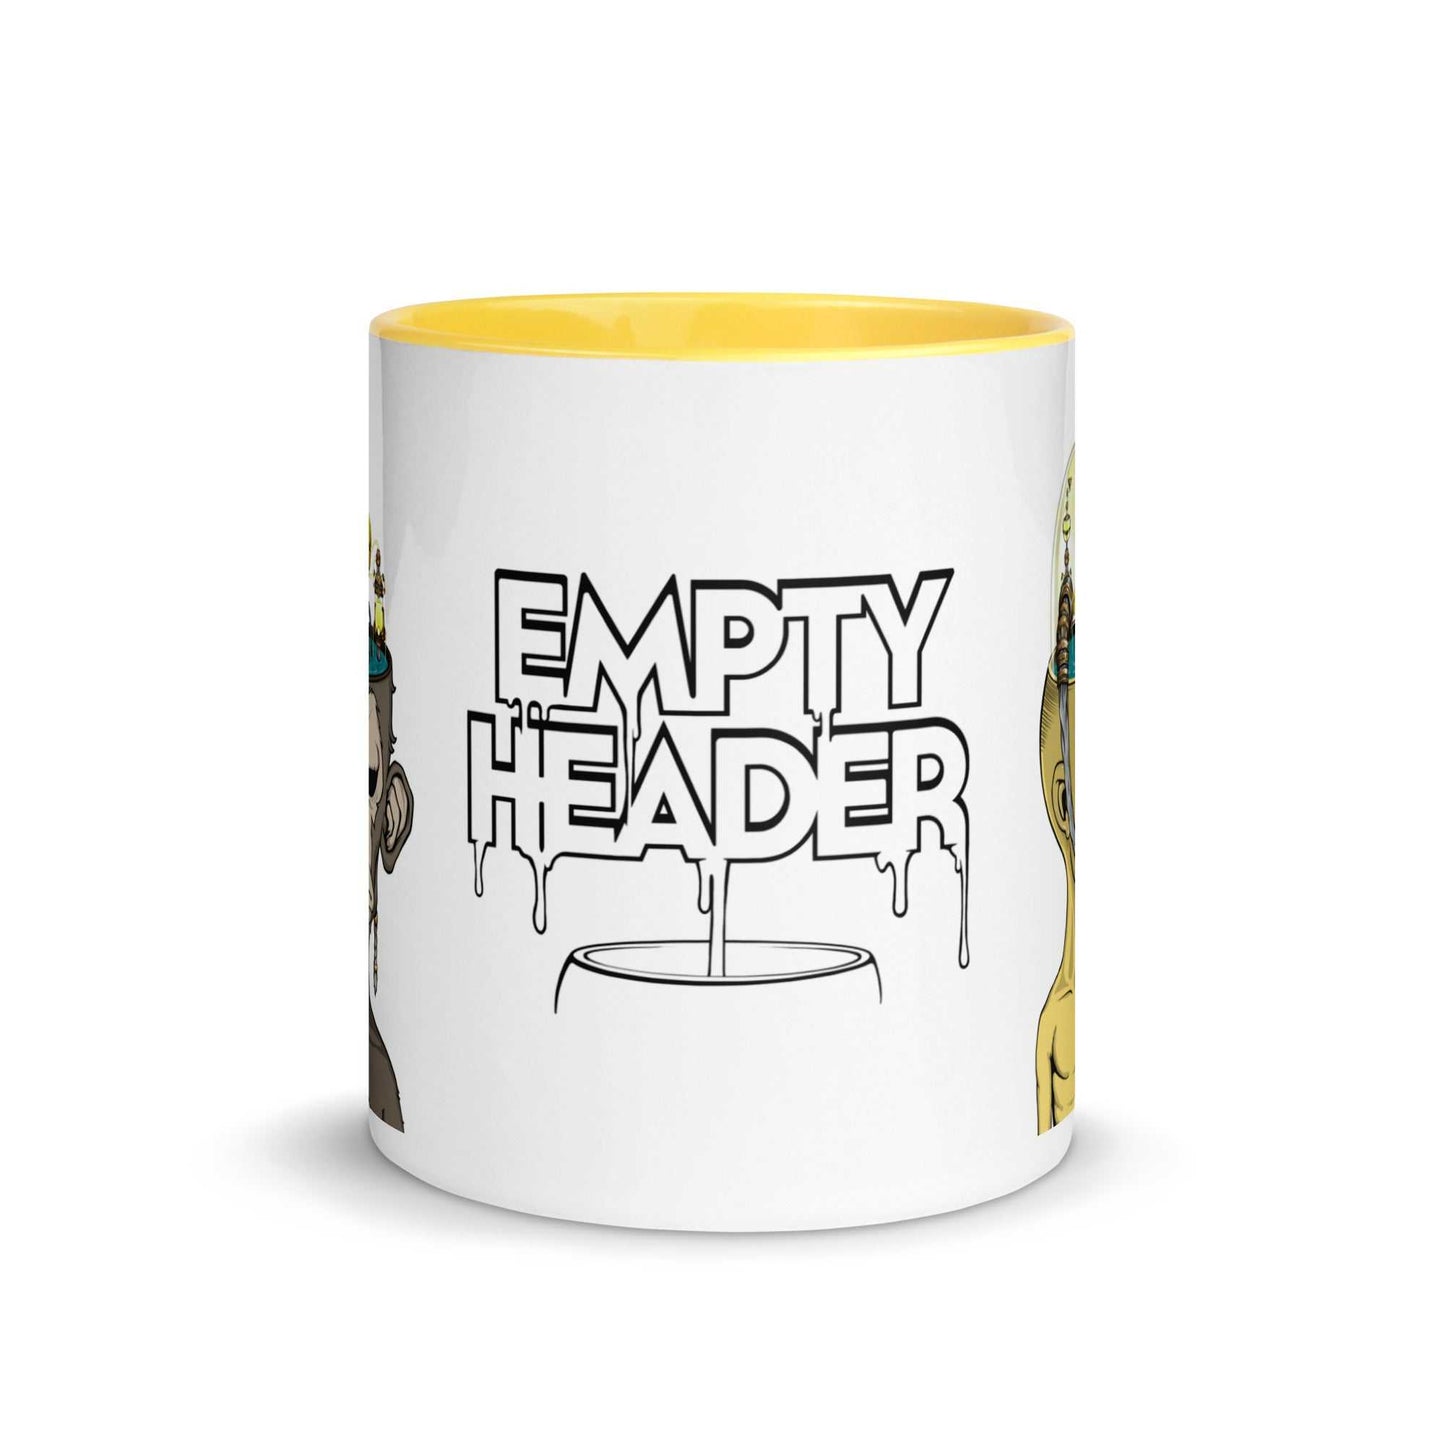 Banana Mind White Glossy MugIntroducing our delightful Banana Mind Mug! Sip your favorite beverages in style with this vibrant yellow mug that will surely bring a smile to your face. Featuring F.U. ShopHOZZY Artistry Store